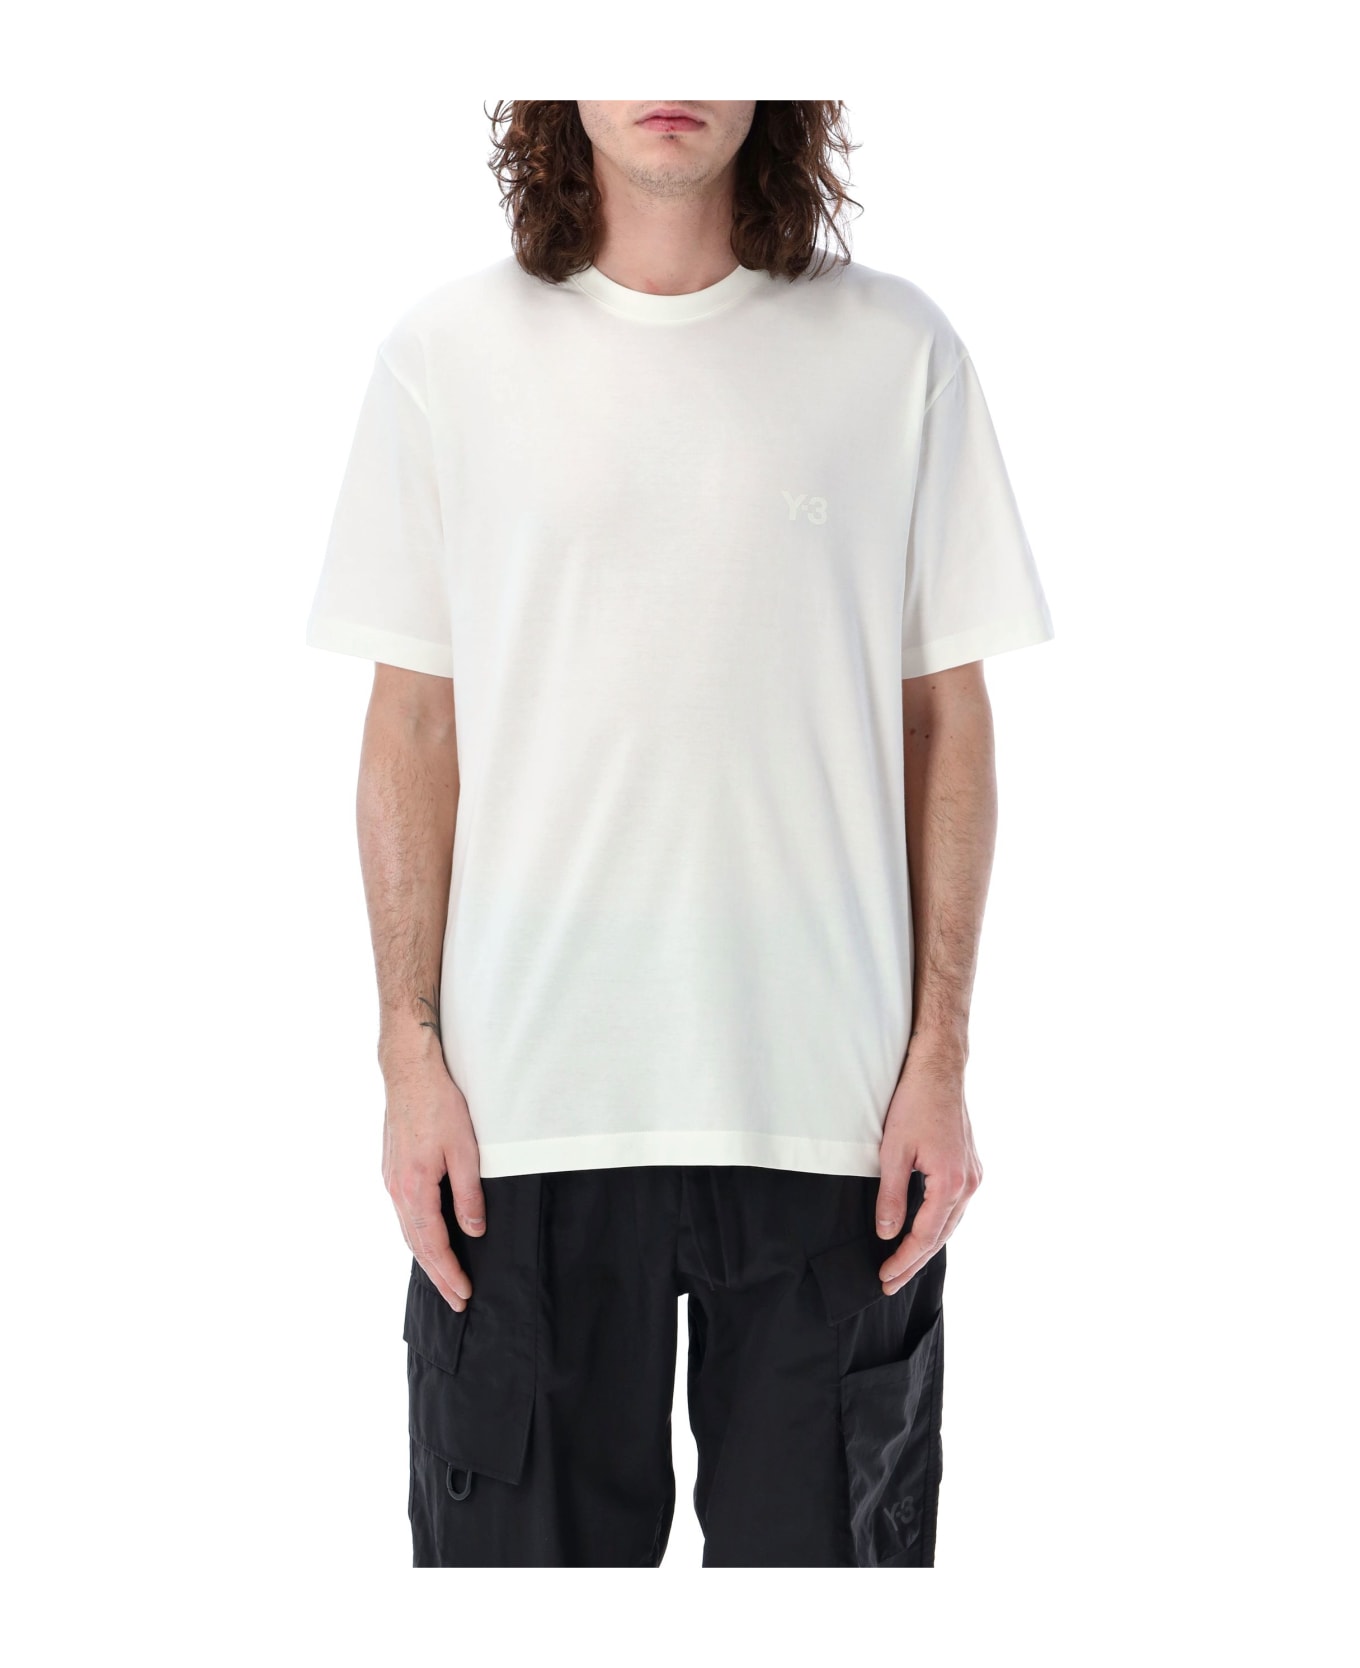 Y-3 Relaxed S/s Tee - WHITE Tシャツ